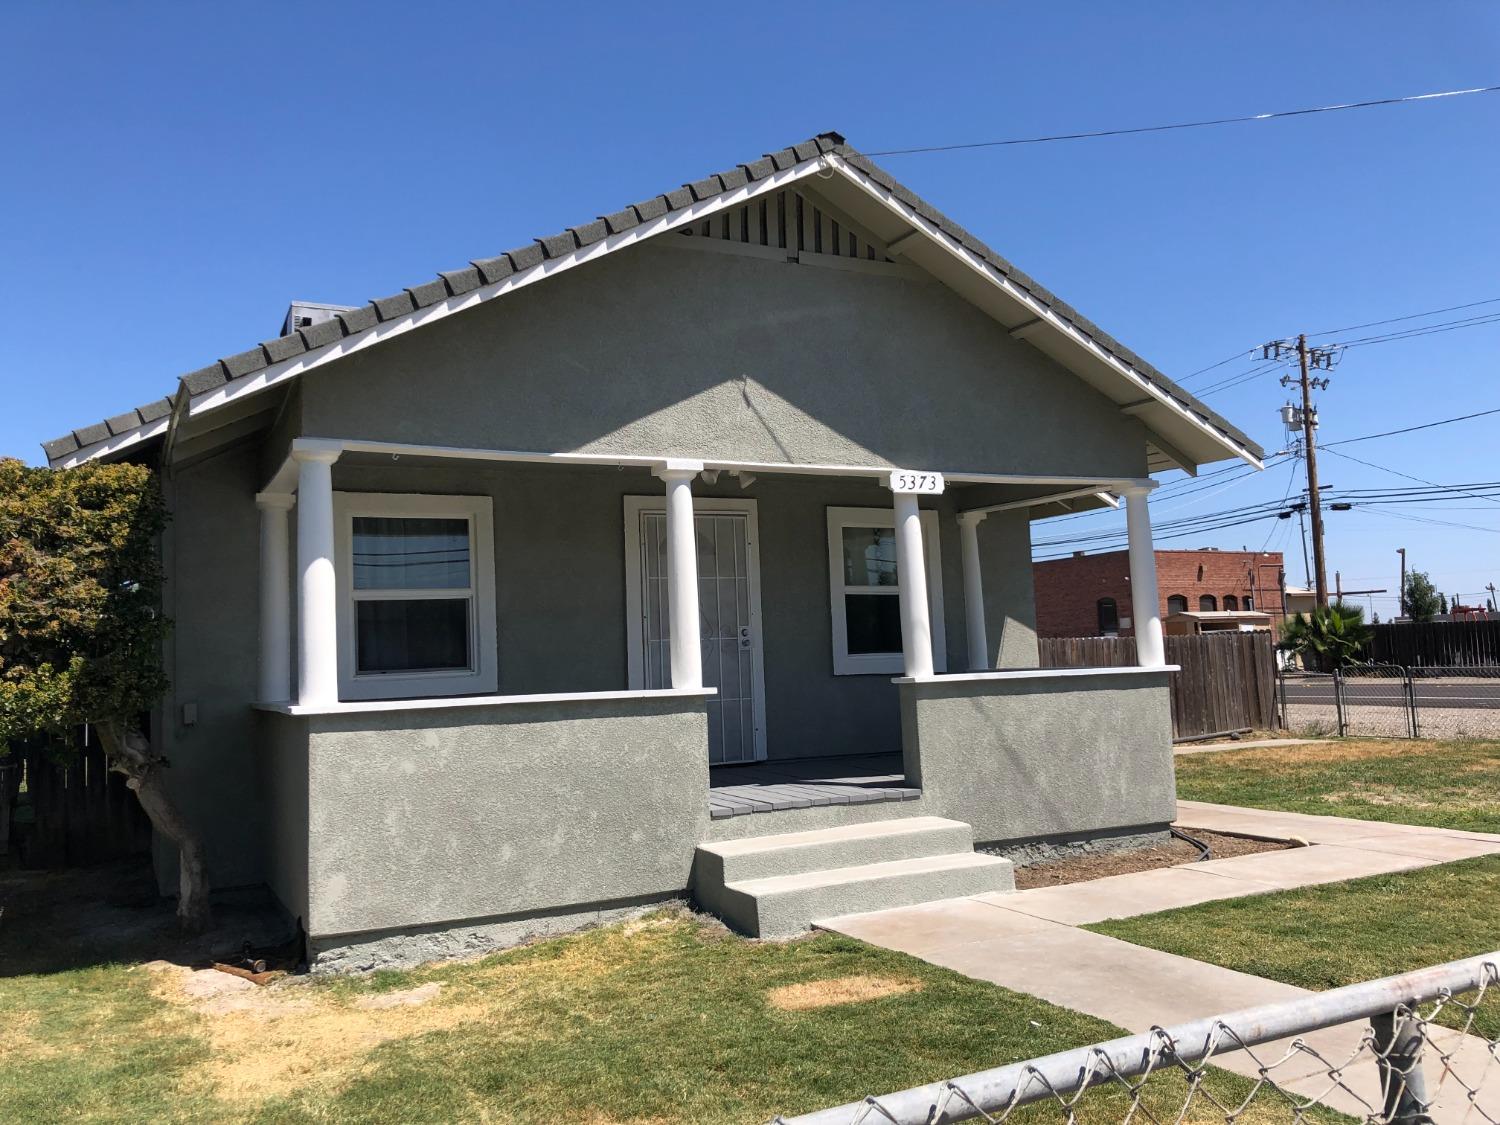 Photo of 5373 W F St in Tracy, CA